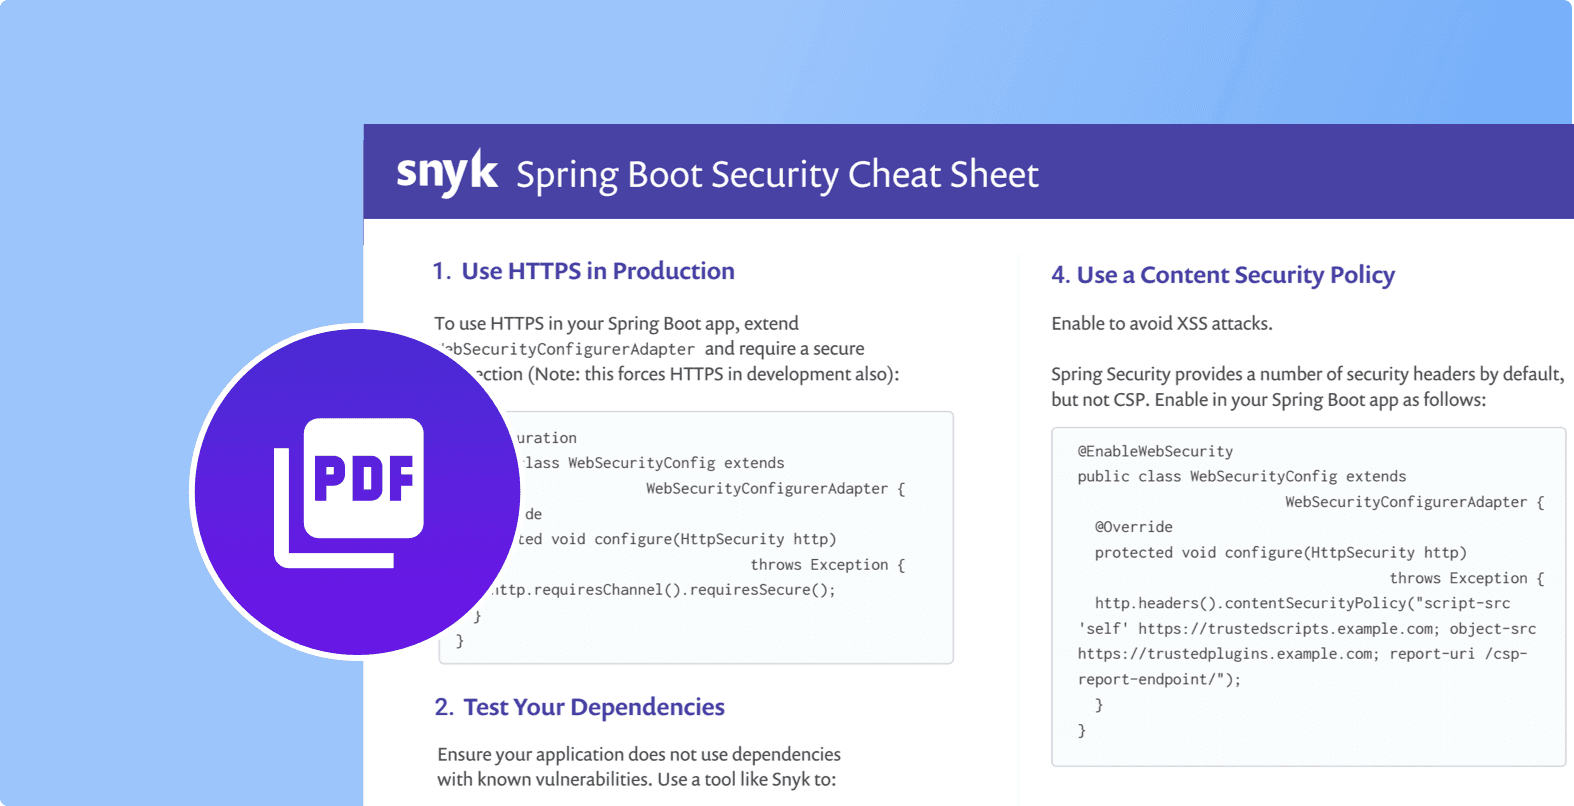 wordpress-sync/10-Spring-Boot-Security-Best-Practices-small